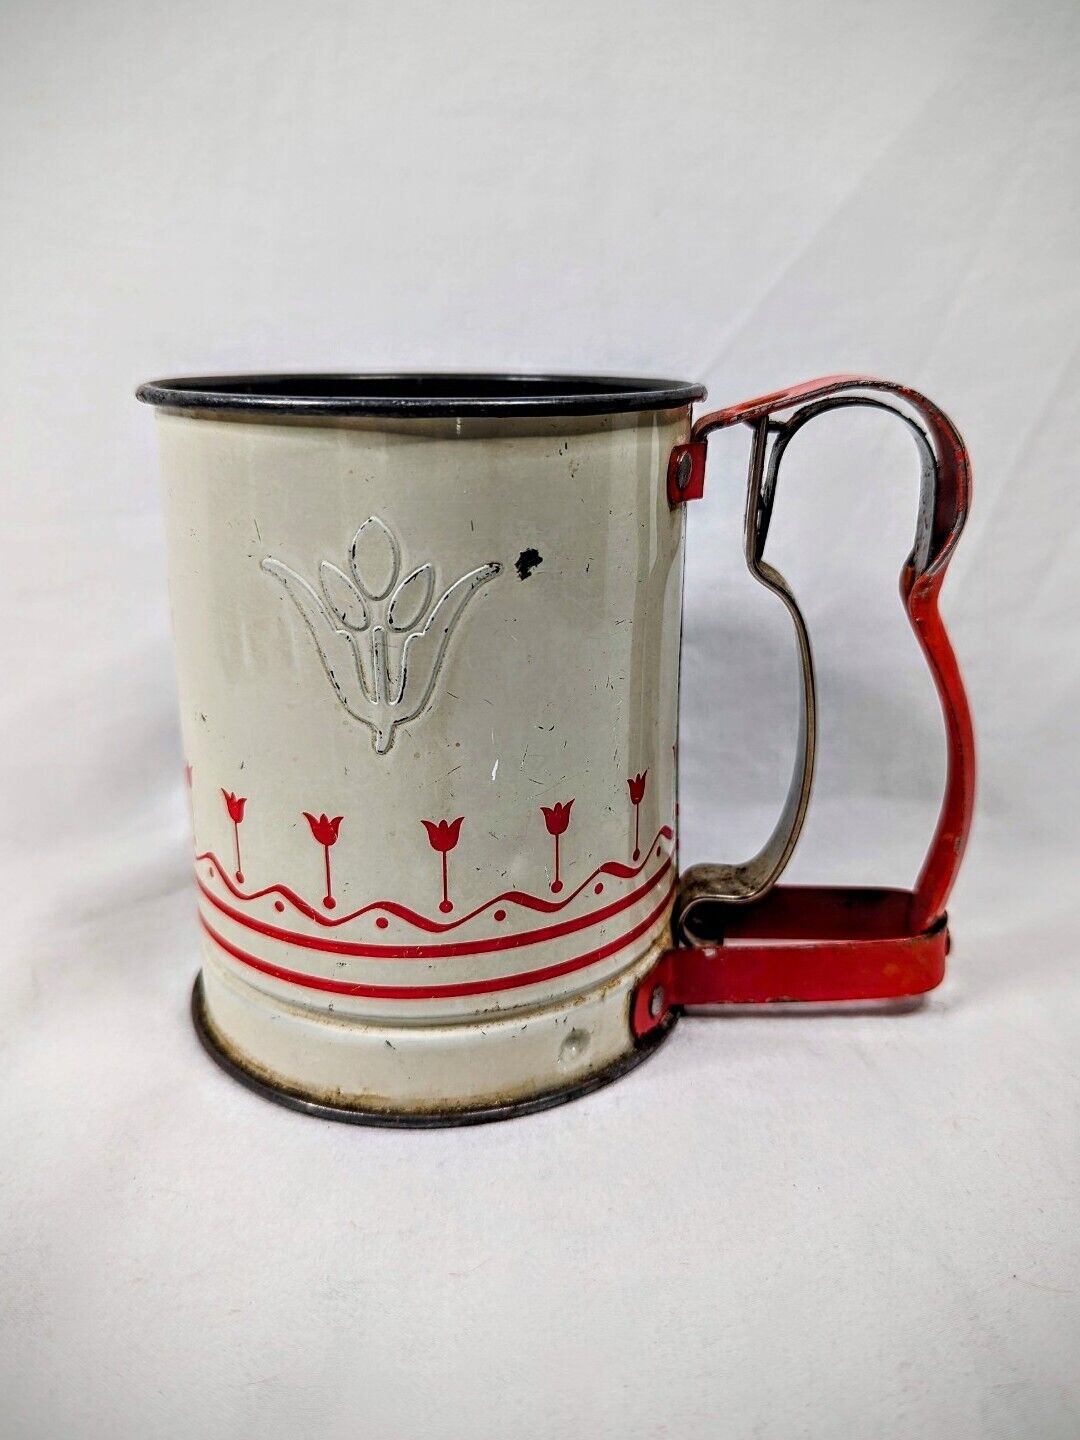 Vintage Baking Sifter Androck Handi-Sift Jr. Red White Tulip Tin Country Kitchen